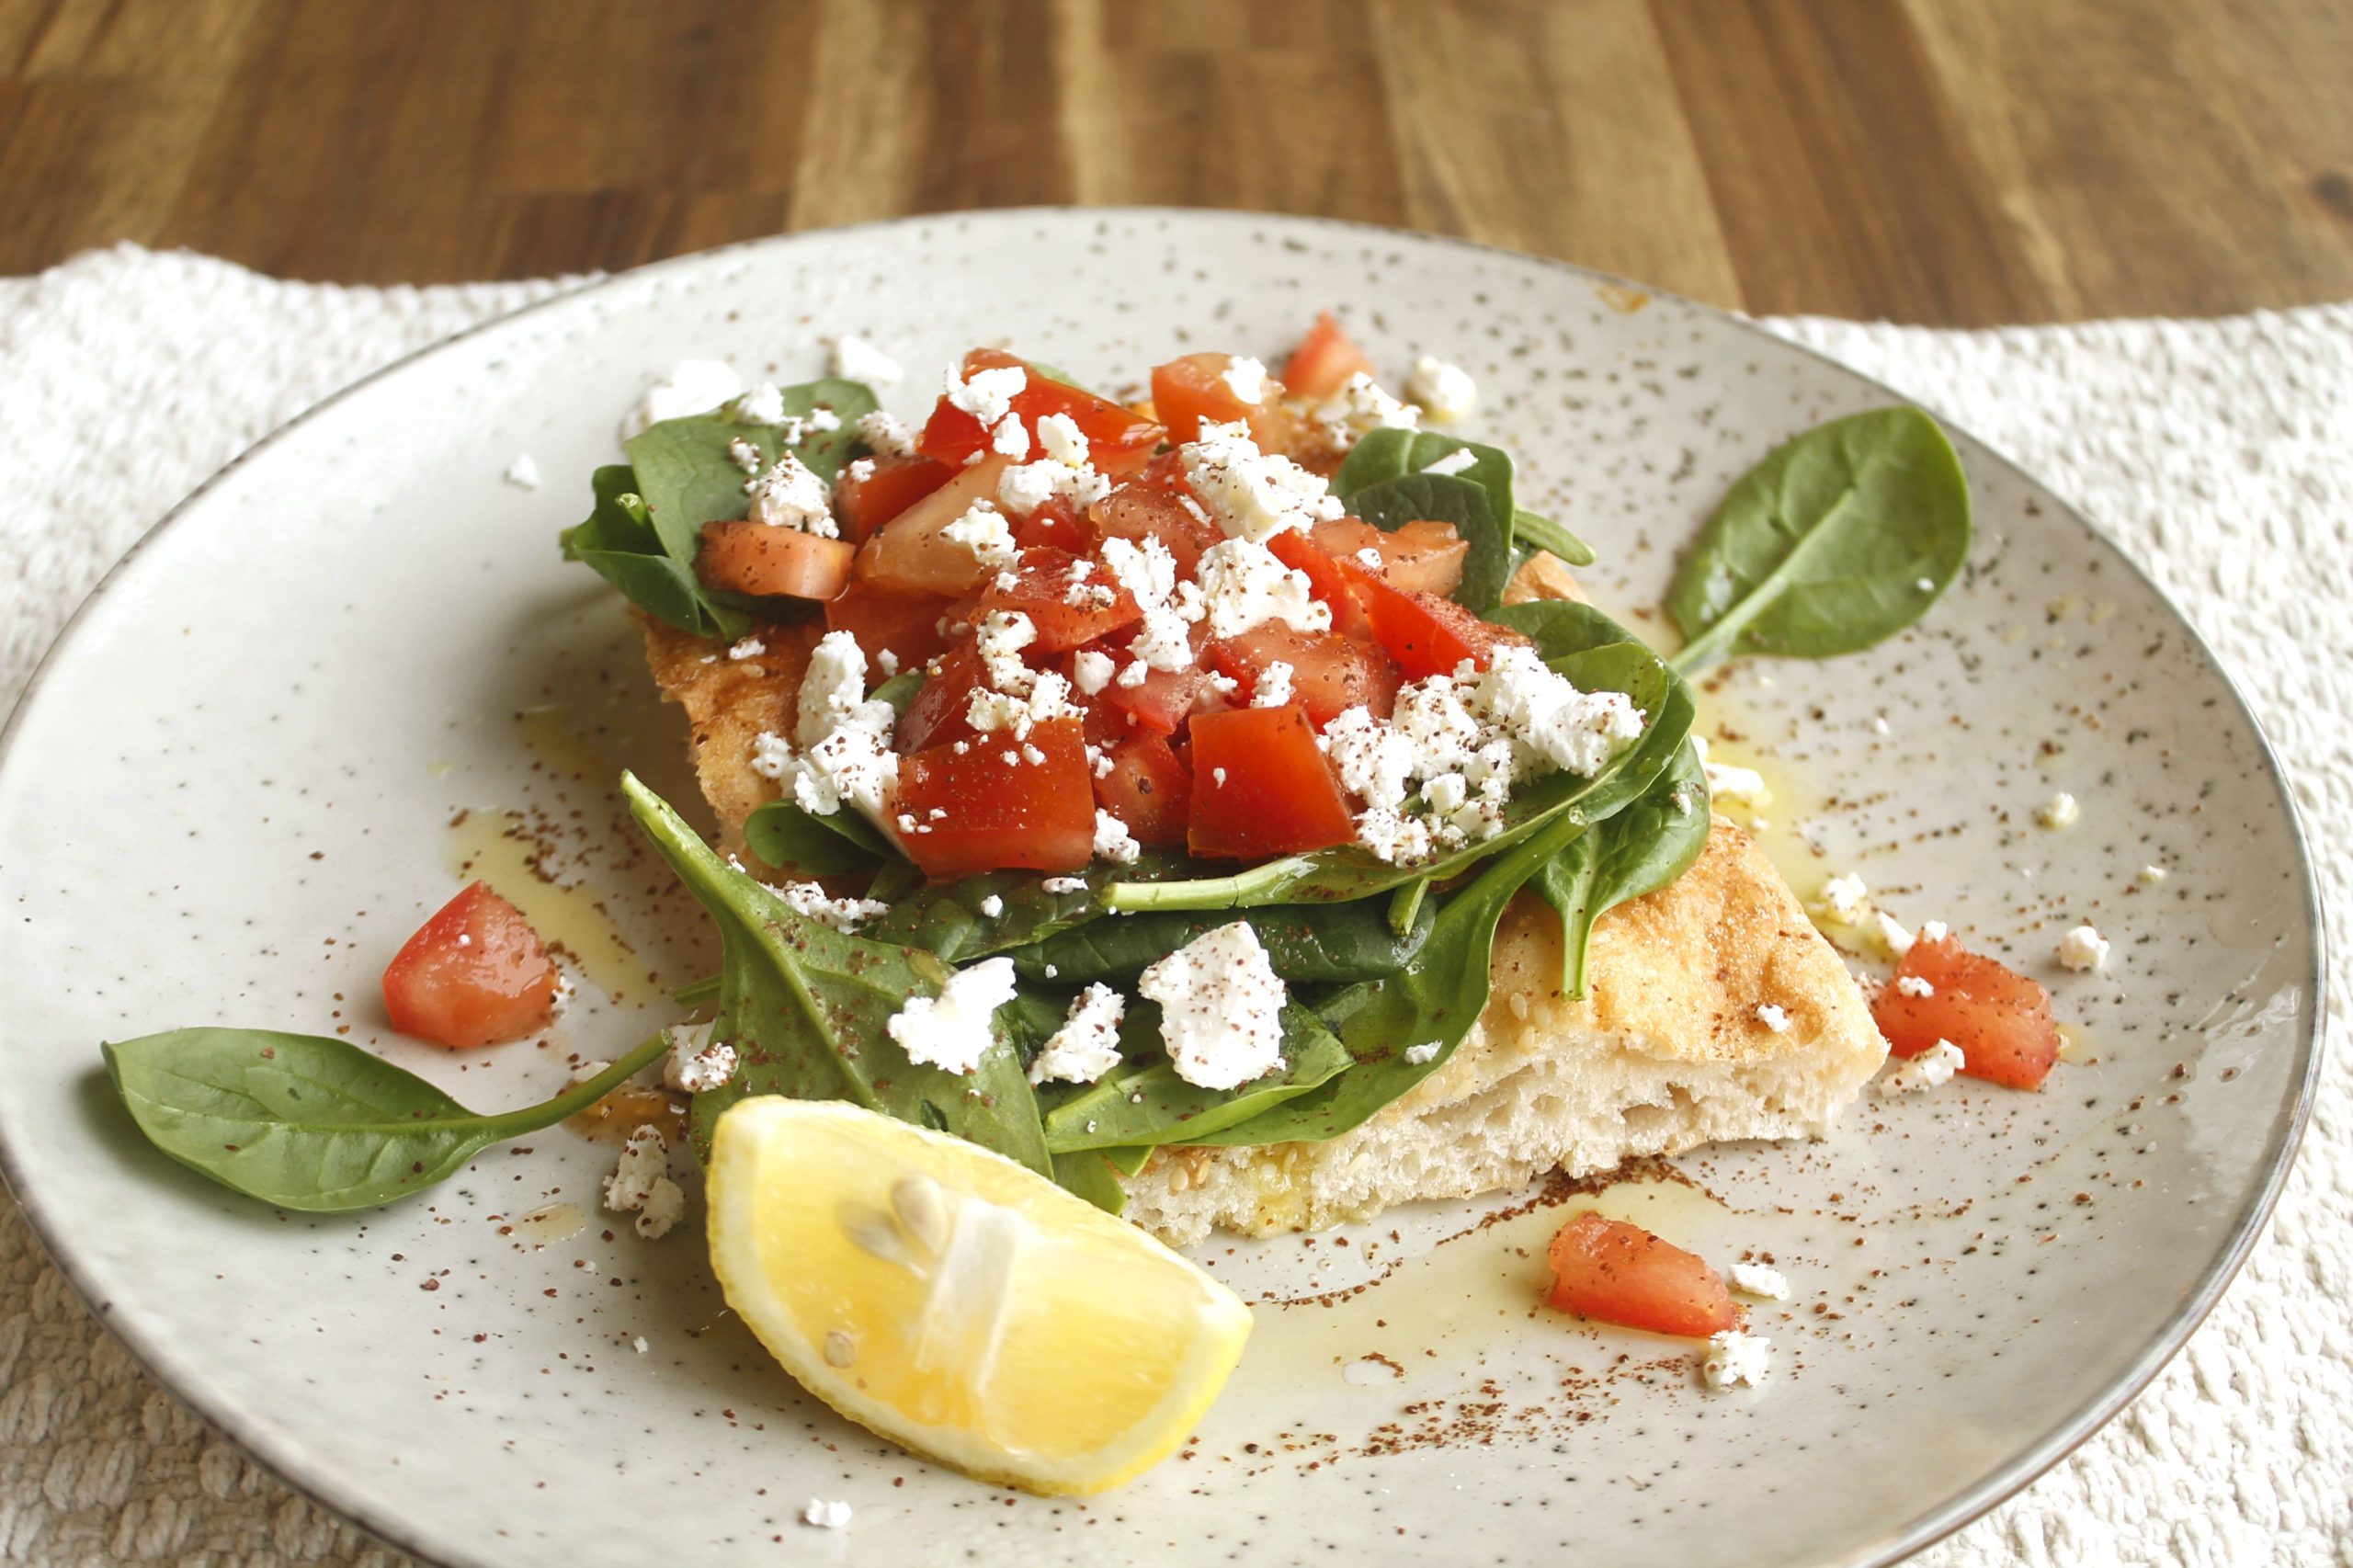 Turkish bread with baby spinach, tomatoes, feta, lemon and sumac